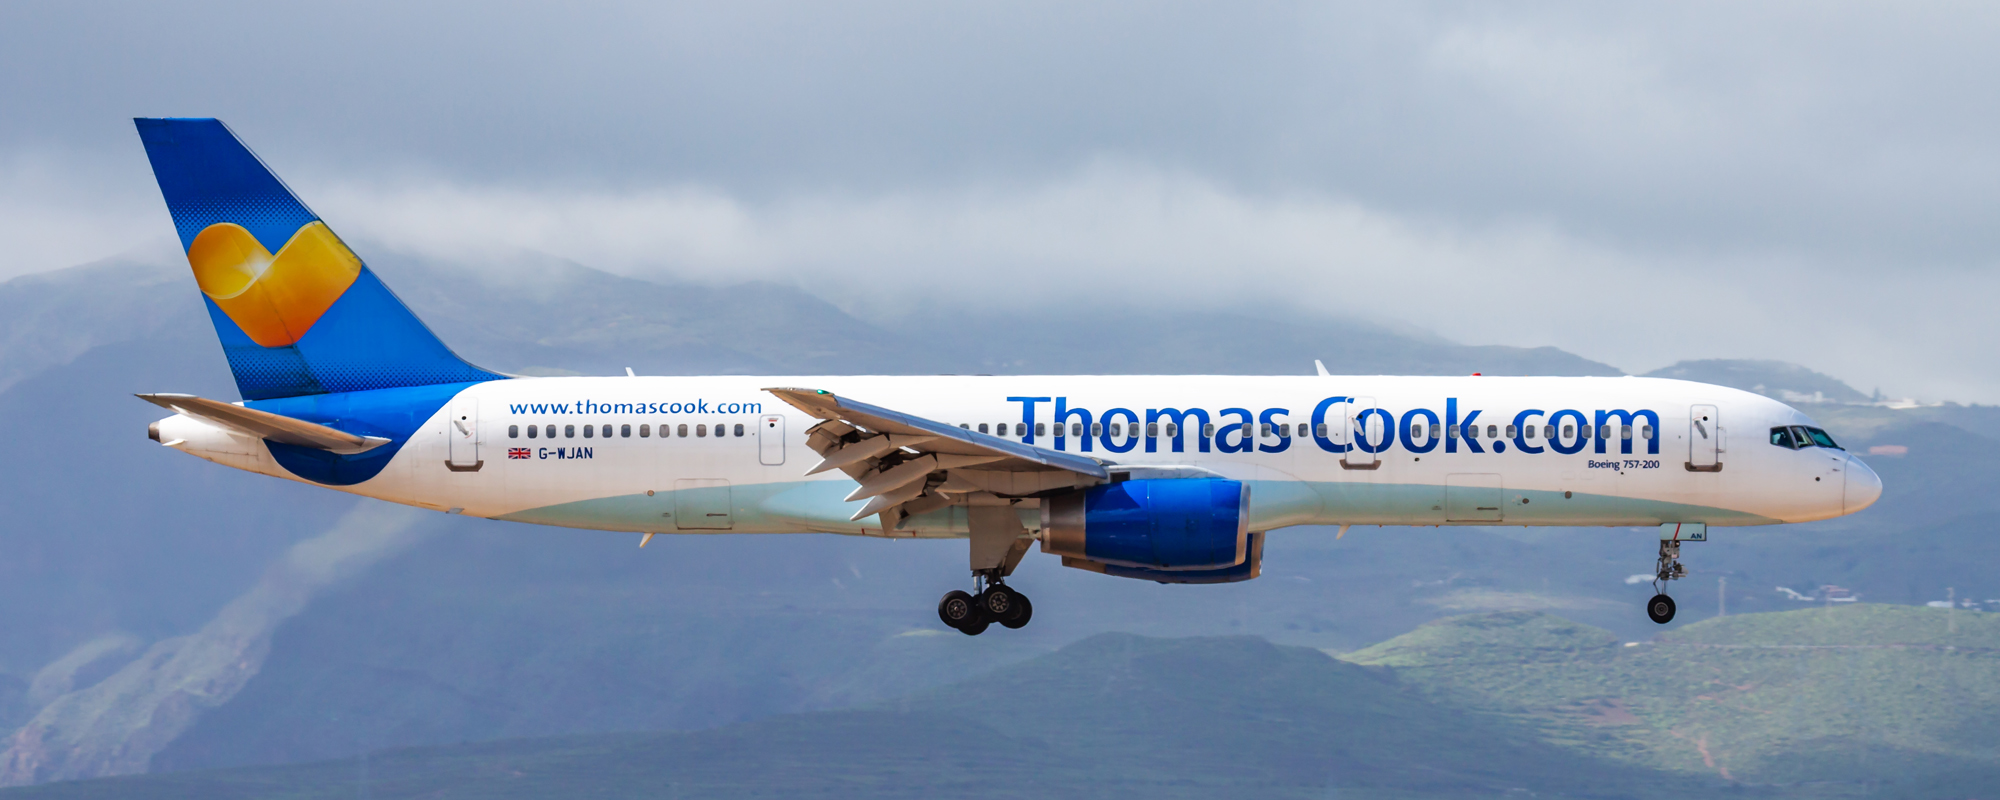 Thomas Cook – Financial disaster or brand disaster?